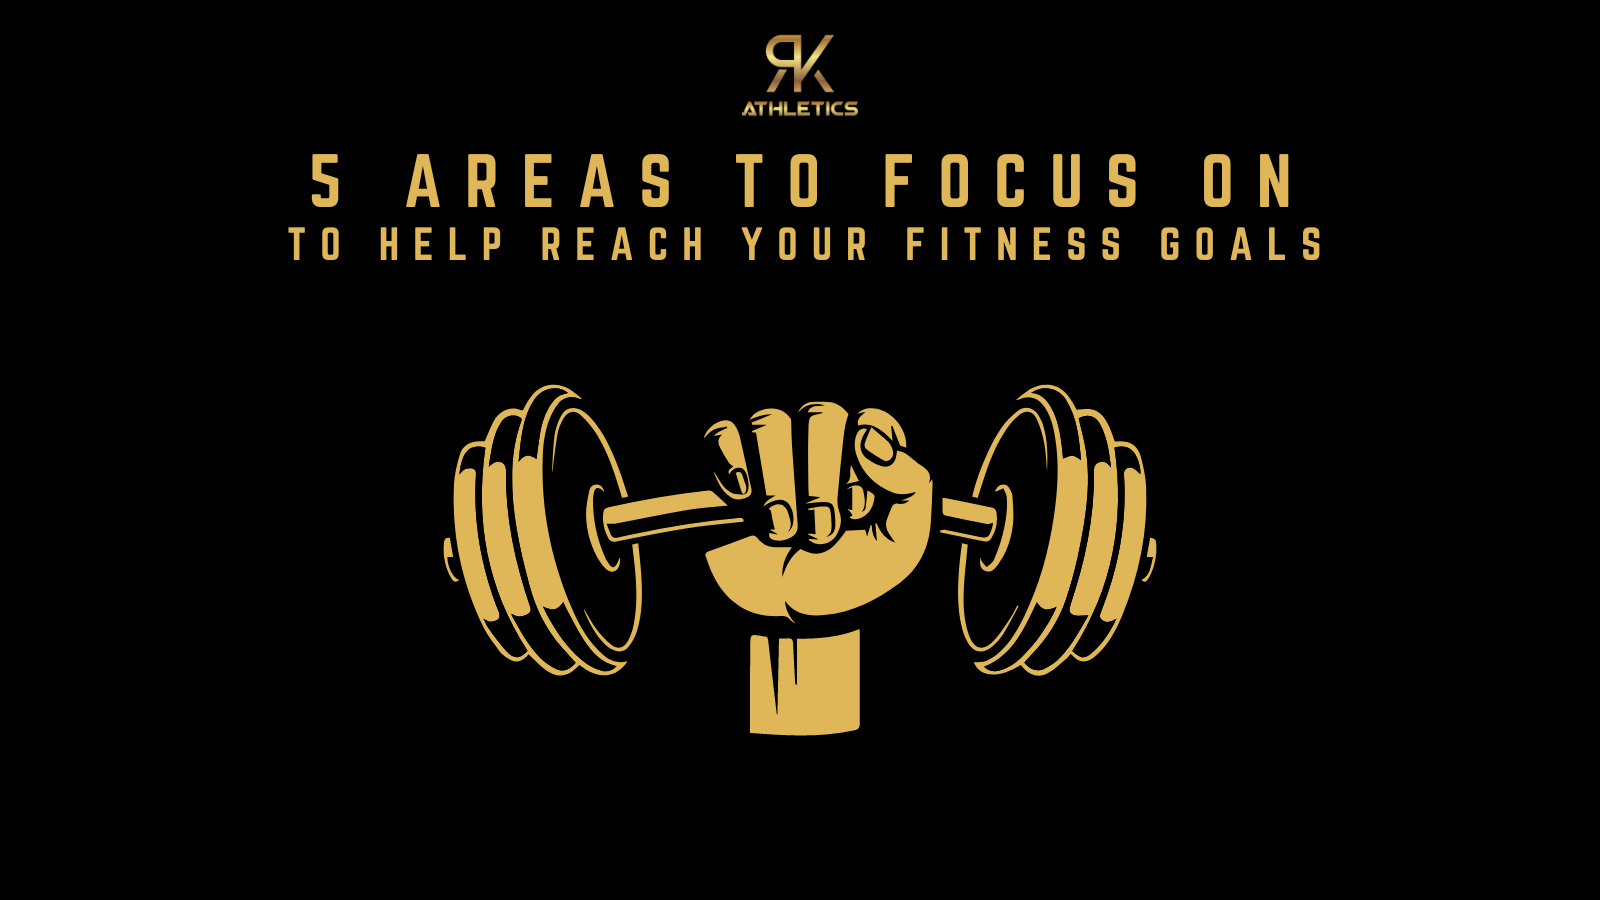 5 Areas To Focus On For Your Fitness Goals